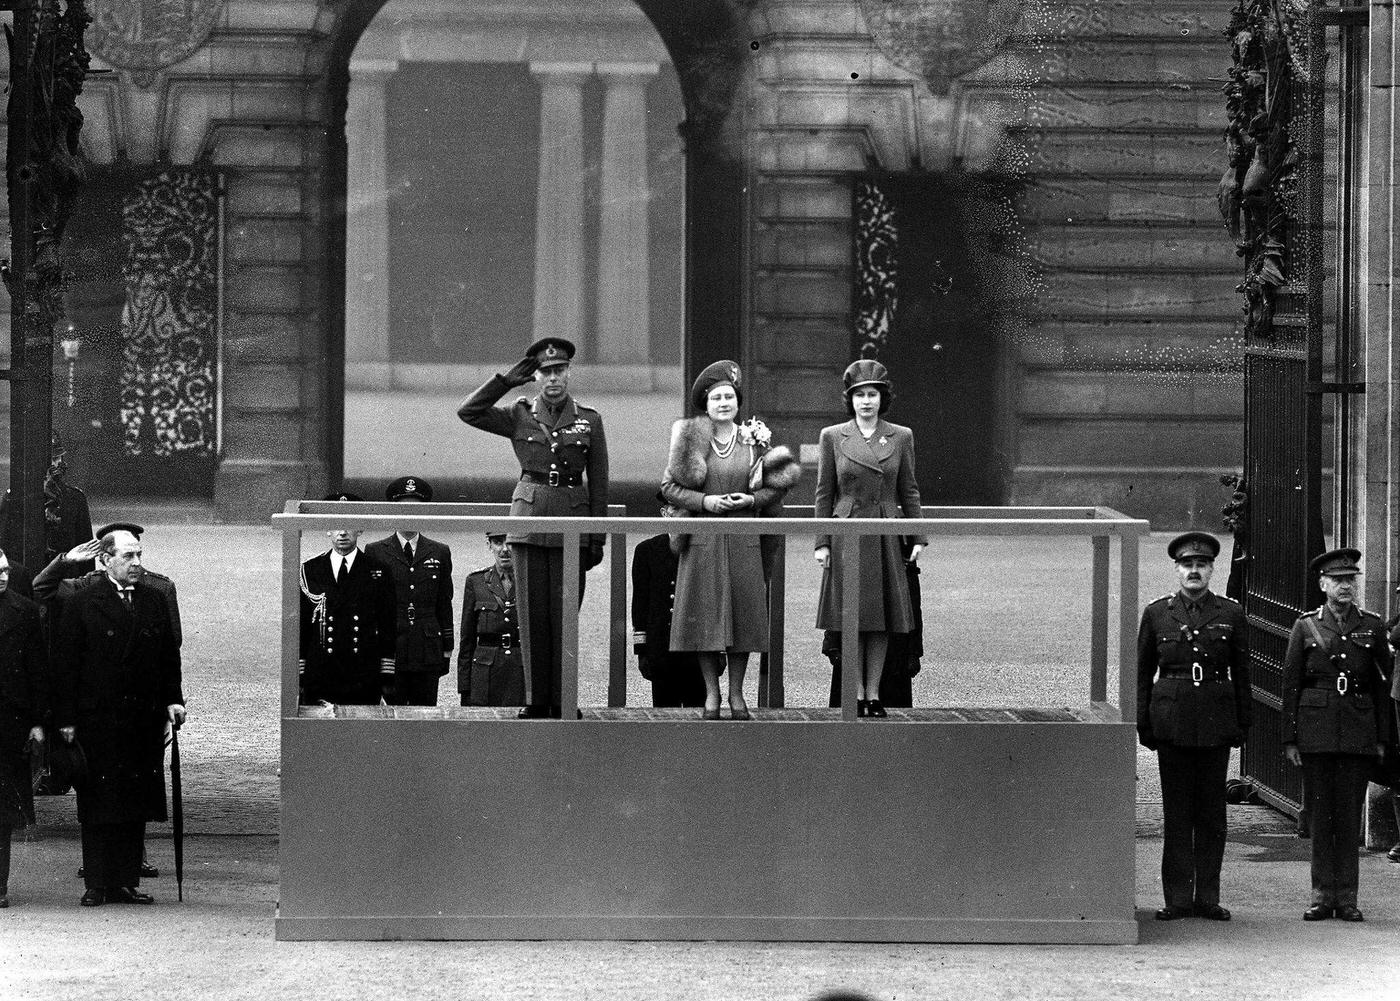 King George VI and Queen Elizabeth accompanied by Princess Elizabeth on the saluting base at Buckingham Palace, as the "Salute the Soldier" parade marches by.